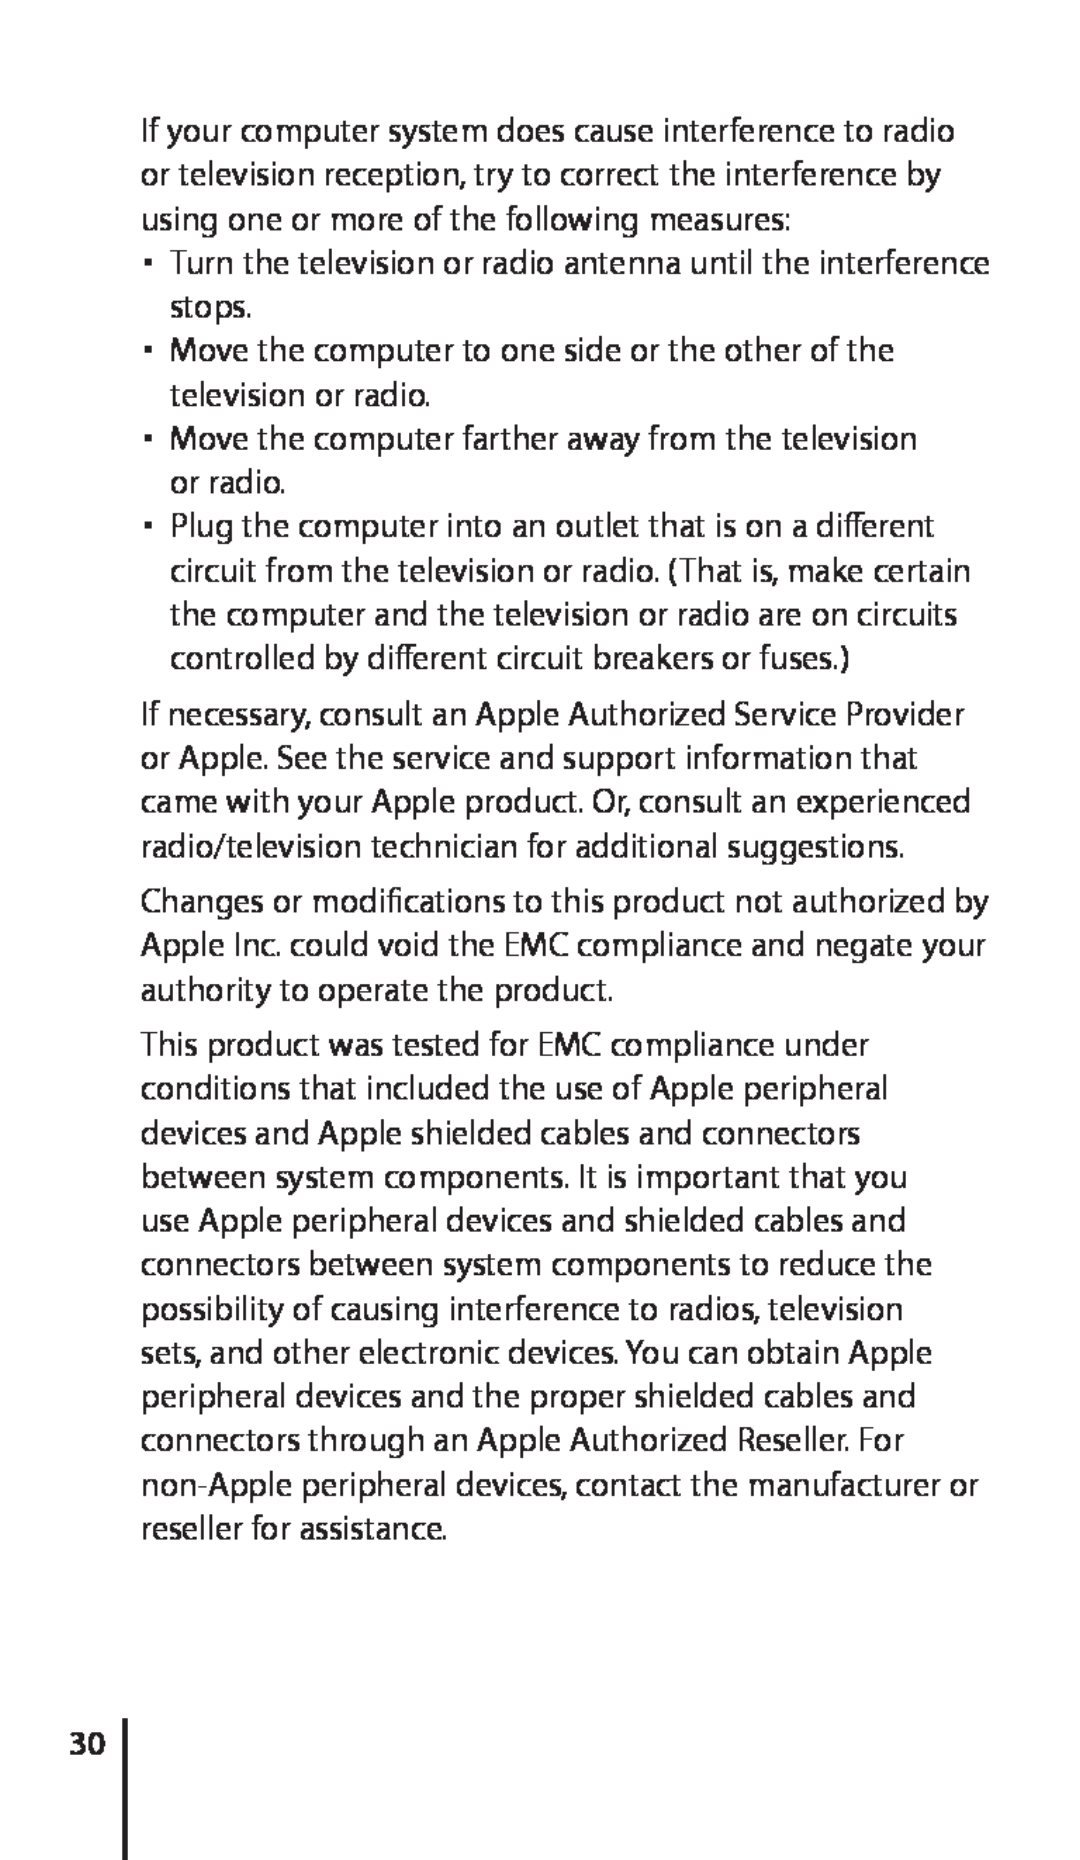 Apple Nike + iPod Sensor, 034-4945-A manual Turn the television or radio antenna until the interference stops 